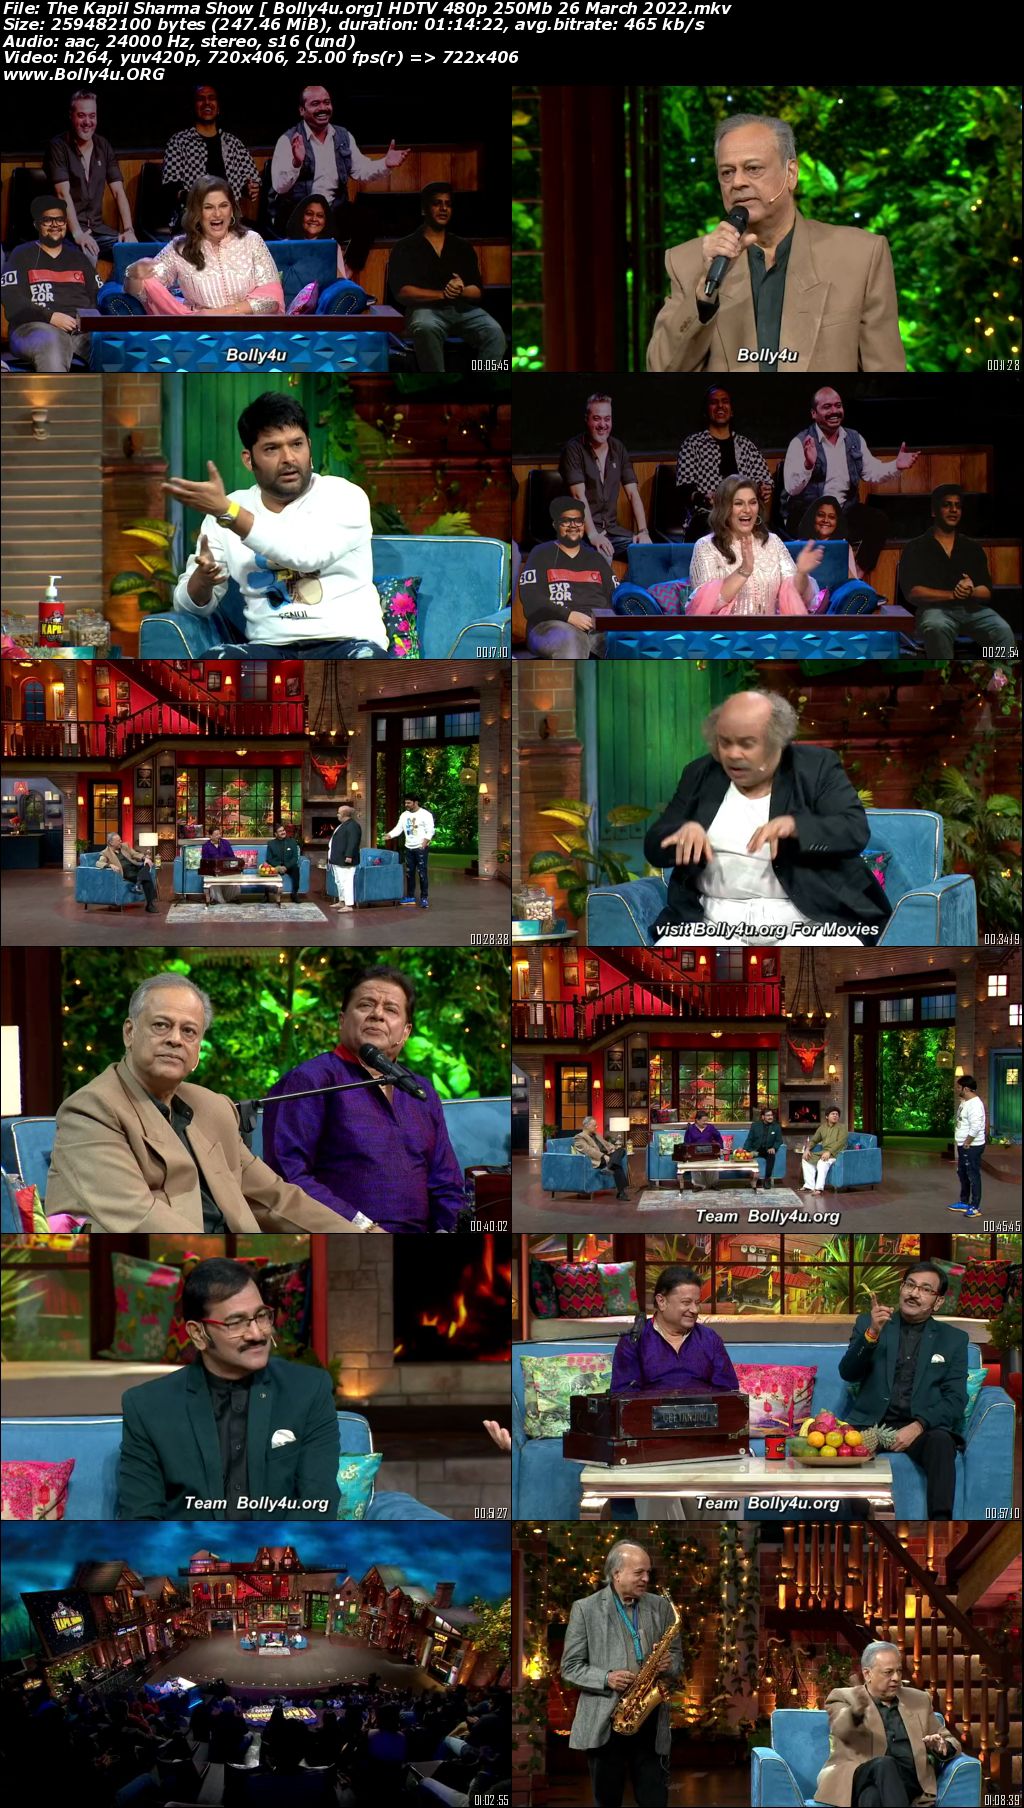 The Kapil Sharma Show HDTV 480p 250Mb 26 March 2022 Download